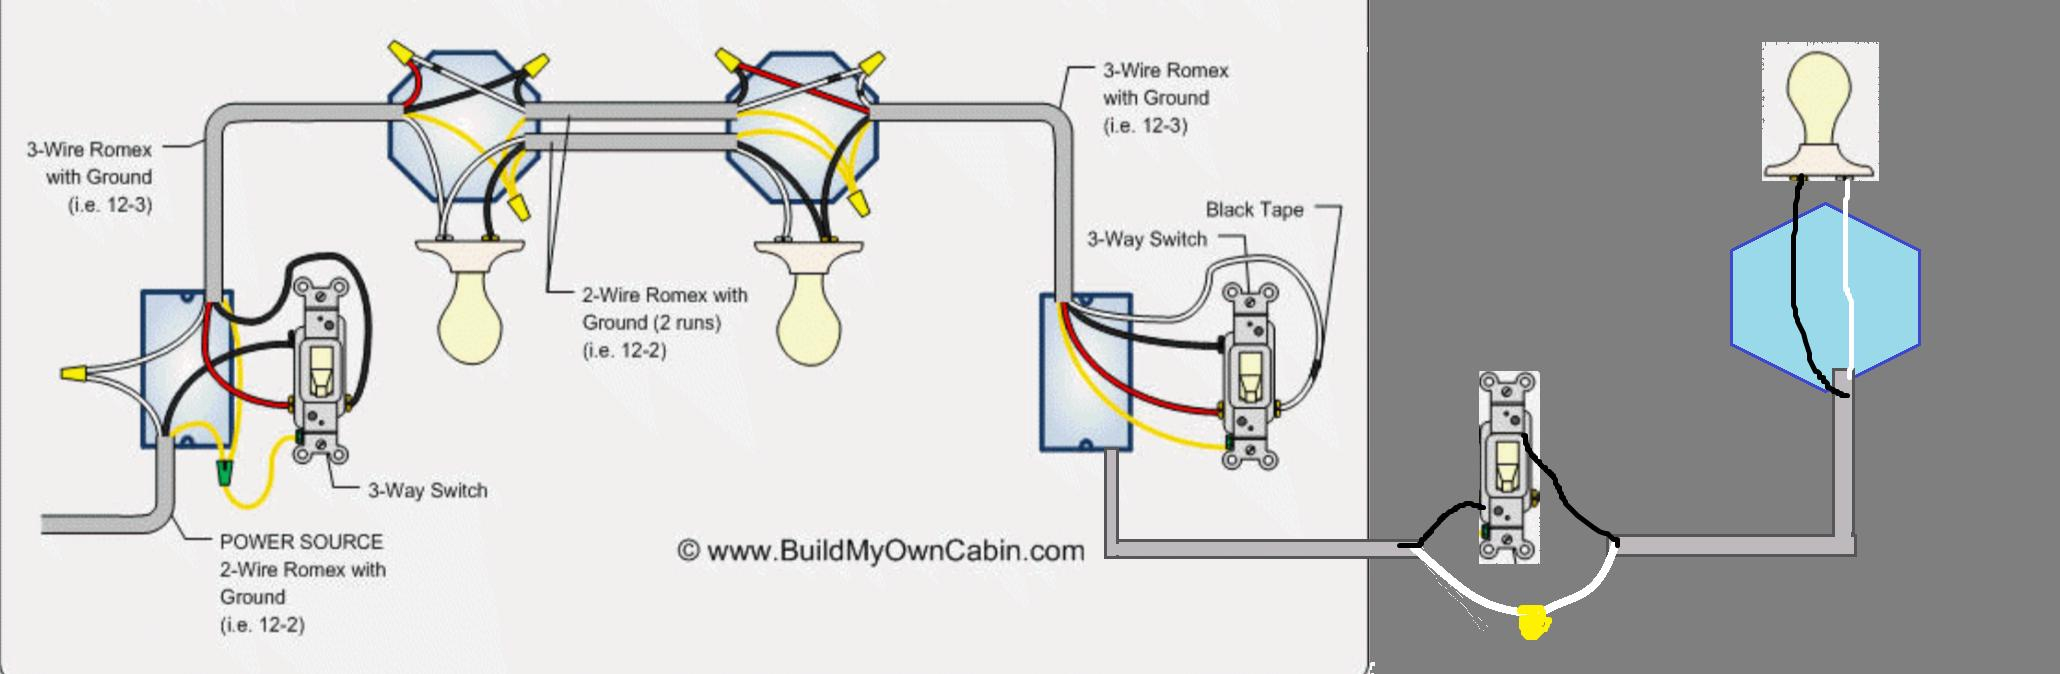 Wiring - Going From 3 Way Switch To A Regular Switch - Home - Wiring Diagram For 3Way Switch